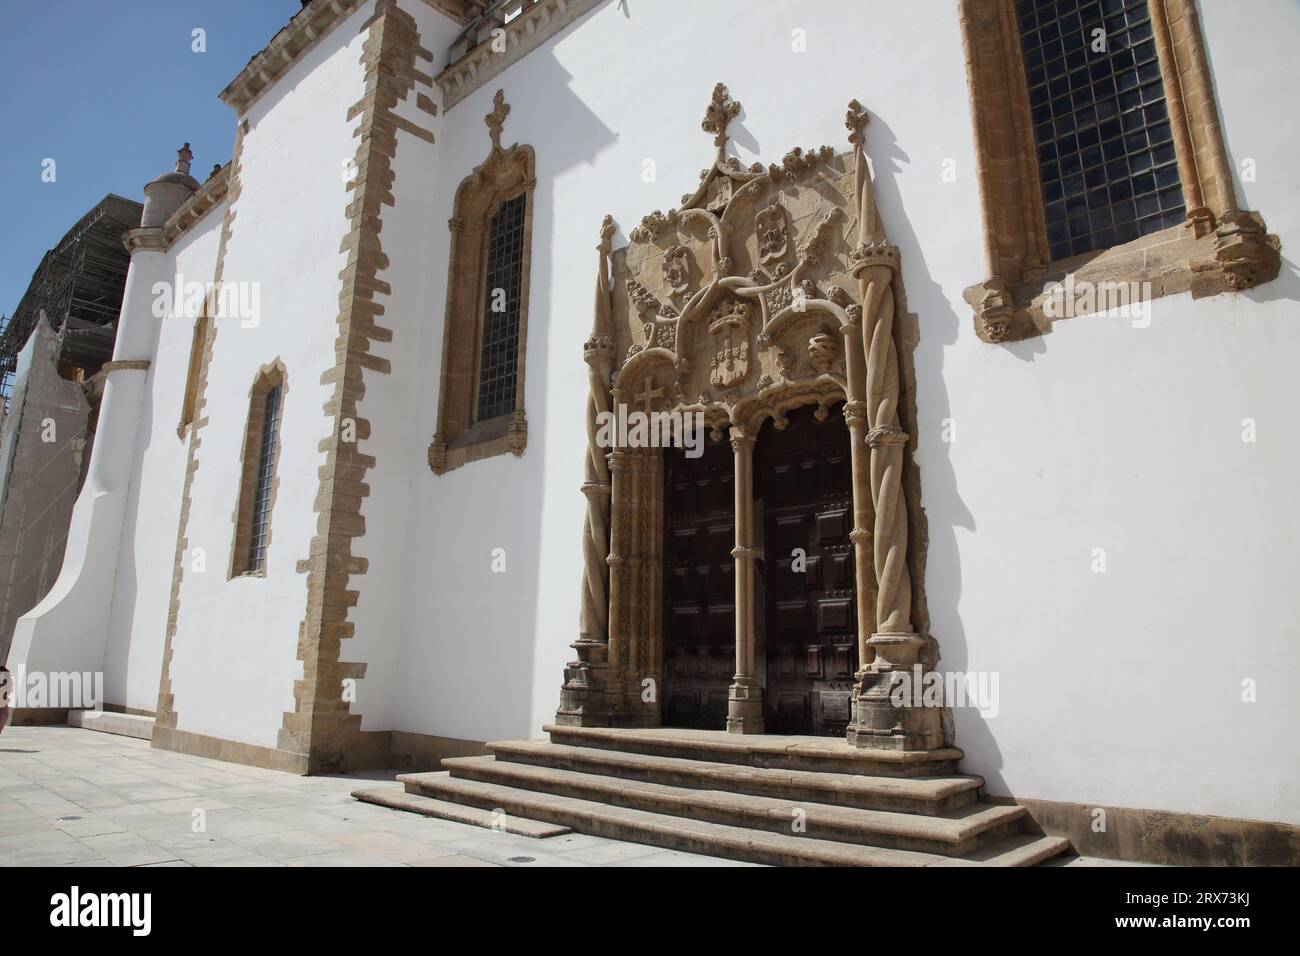 The 16th.Century doors of the Church of Saint Miguel ,by Marcos Pires, in Manueline style, of the University of Coimbra in Coimbra, Portugal Stock Photo